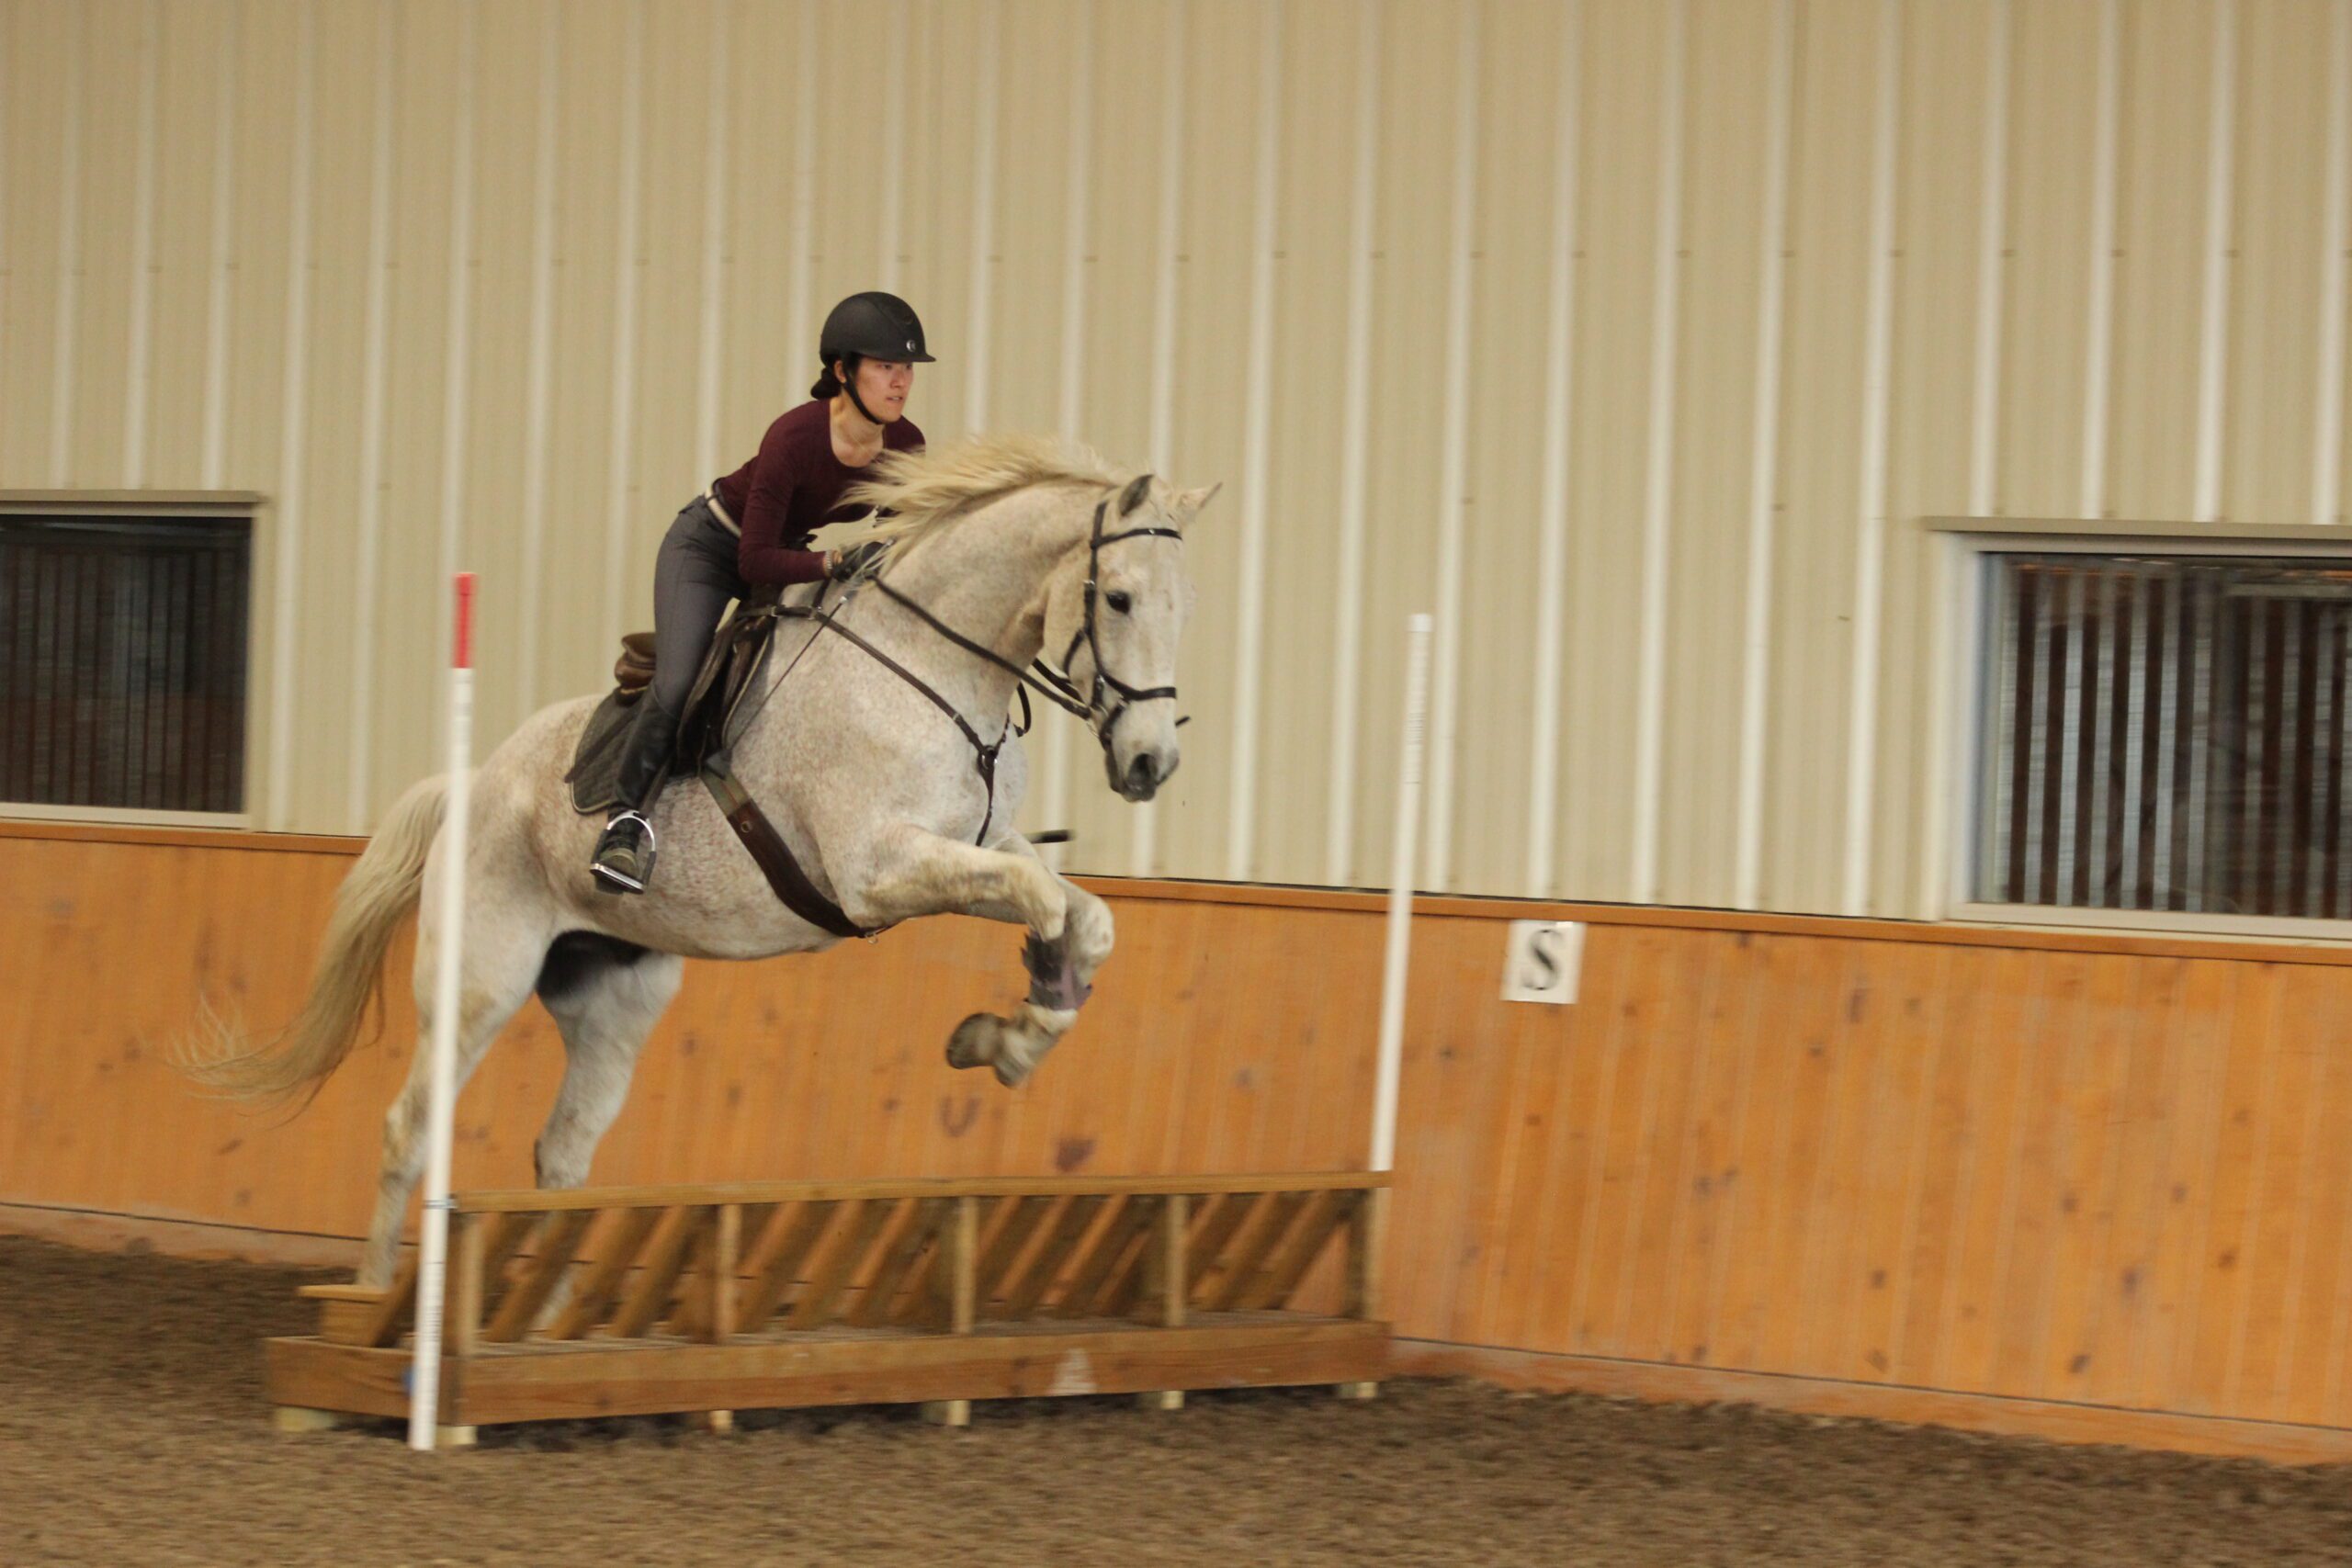 Student jumping horse over bench jump in indoor arena